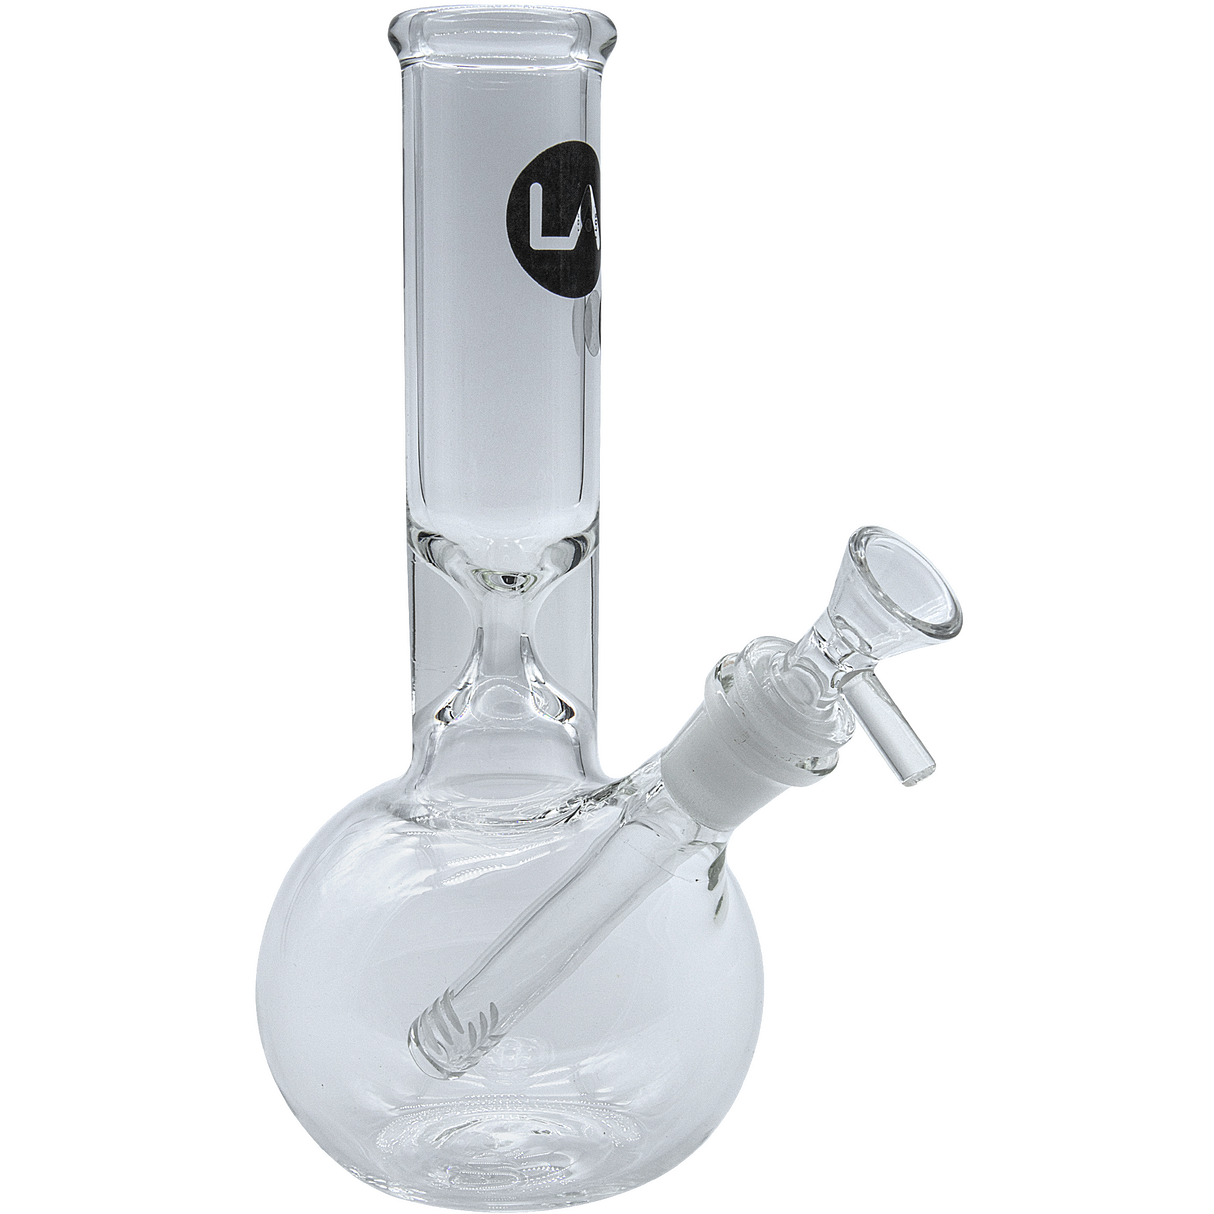 LA Pipes "Baller" Bubble Base Bong with Clear Borosilicate Glass - Side View